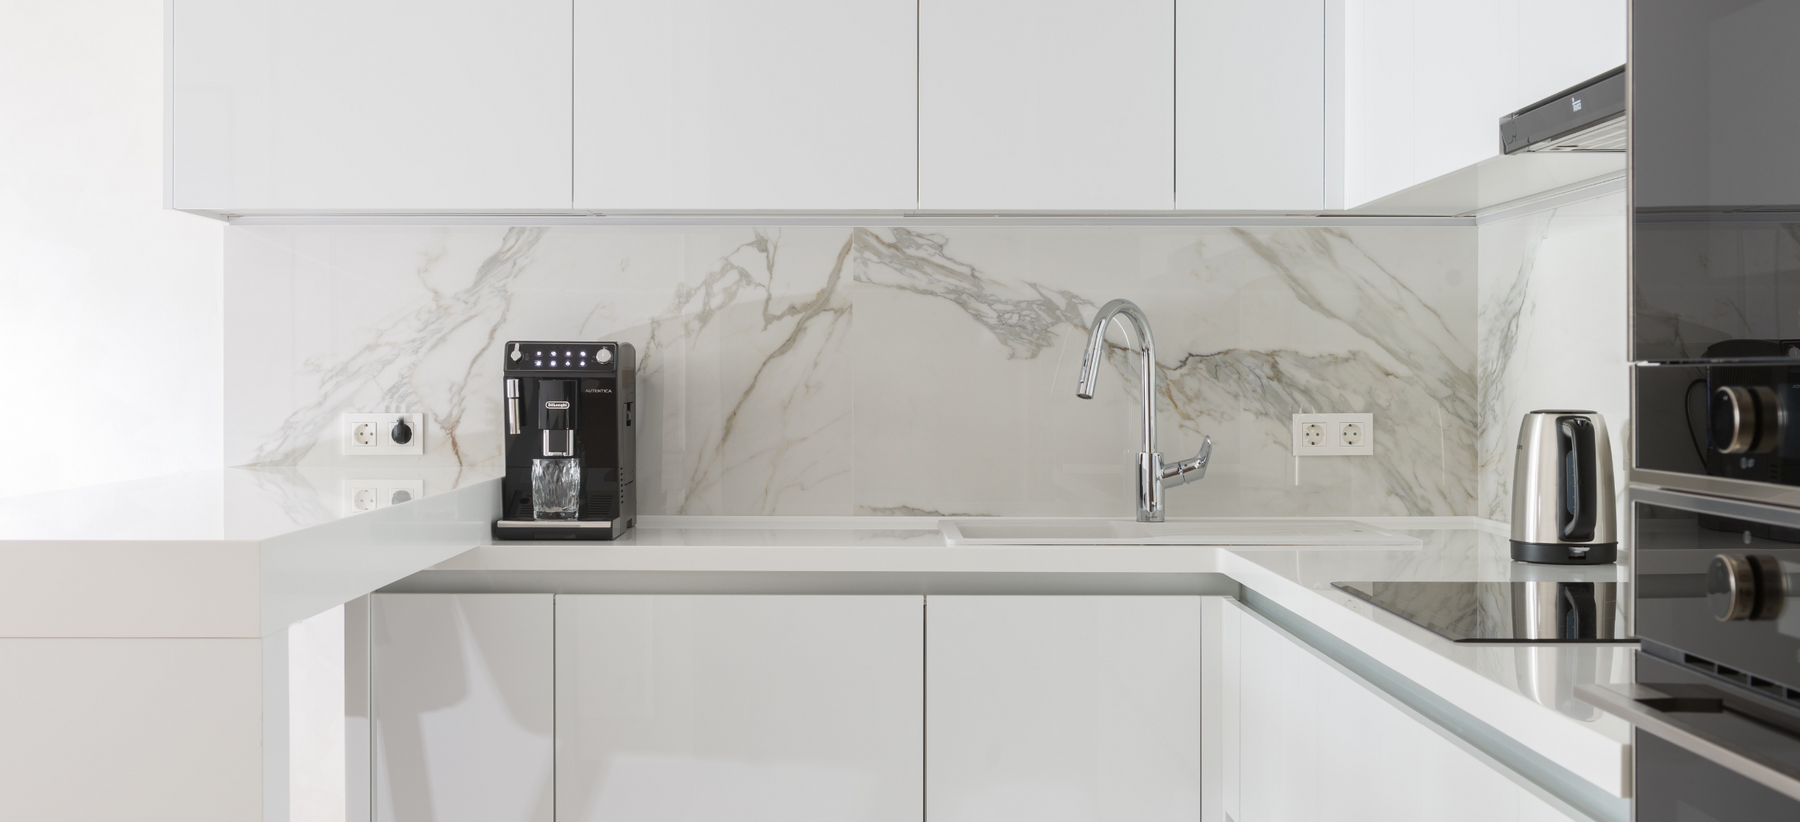 CRAFTING THE WHITE MARBLE KITCHEN OF YOUR DREAMS